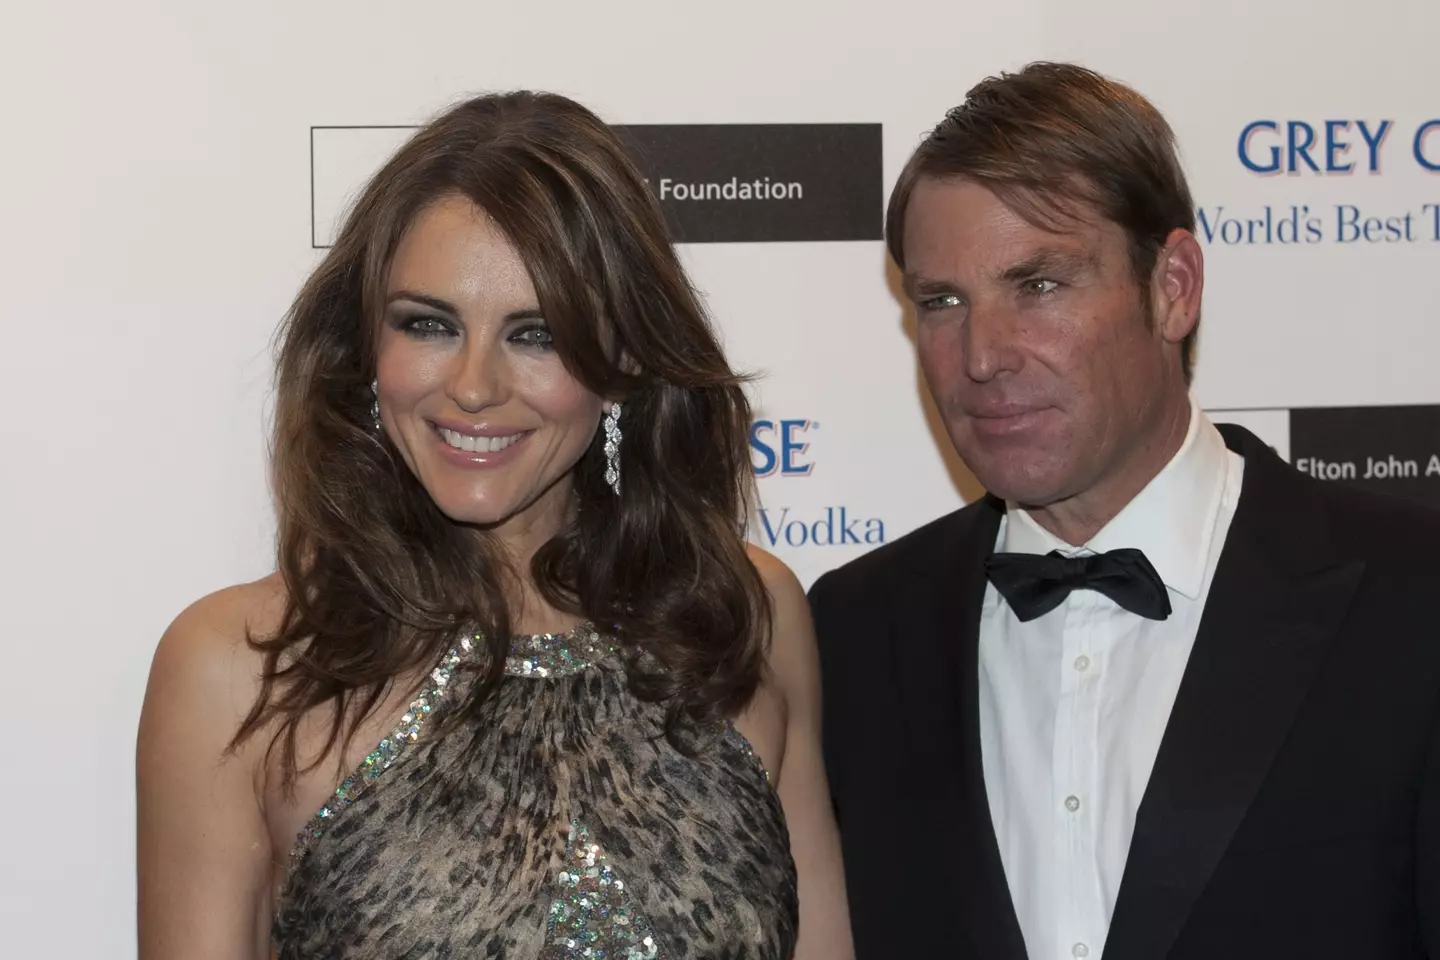 Shayne dated Liz Hurley in the 2010s (